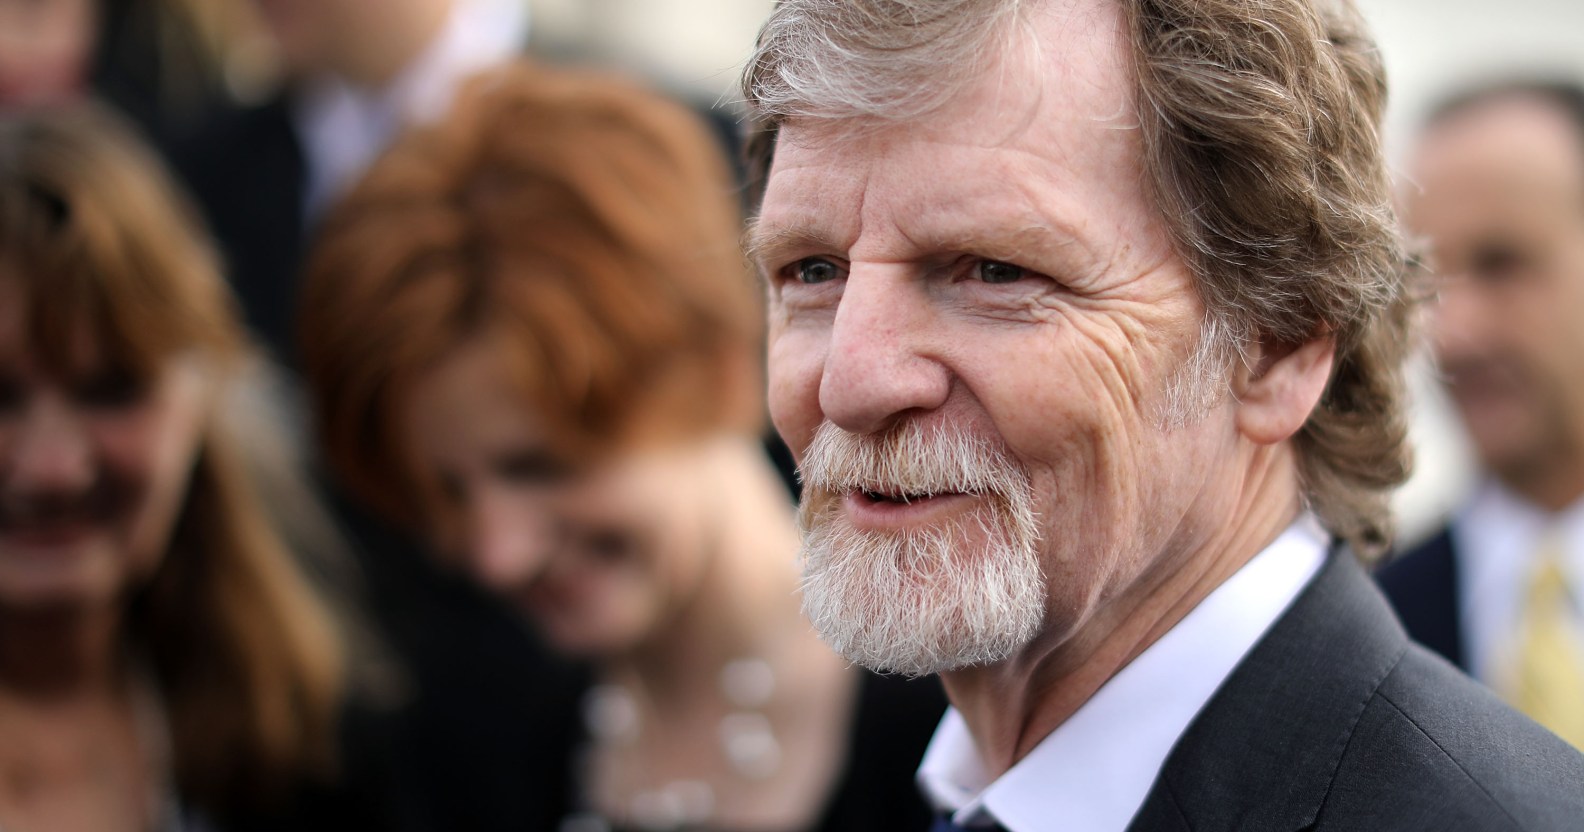 Conservative Christian baker Jack Phillips talks with journalists in front of the Supreme Court after the court heard the case Masterpiece Cakeshop v. Colorado Civil Rights Commission December 5, 2017 in Washington, DC.